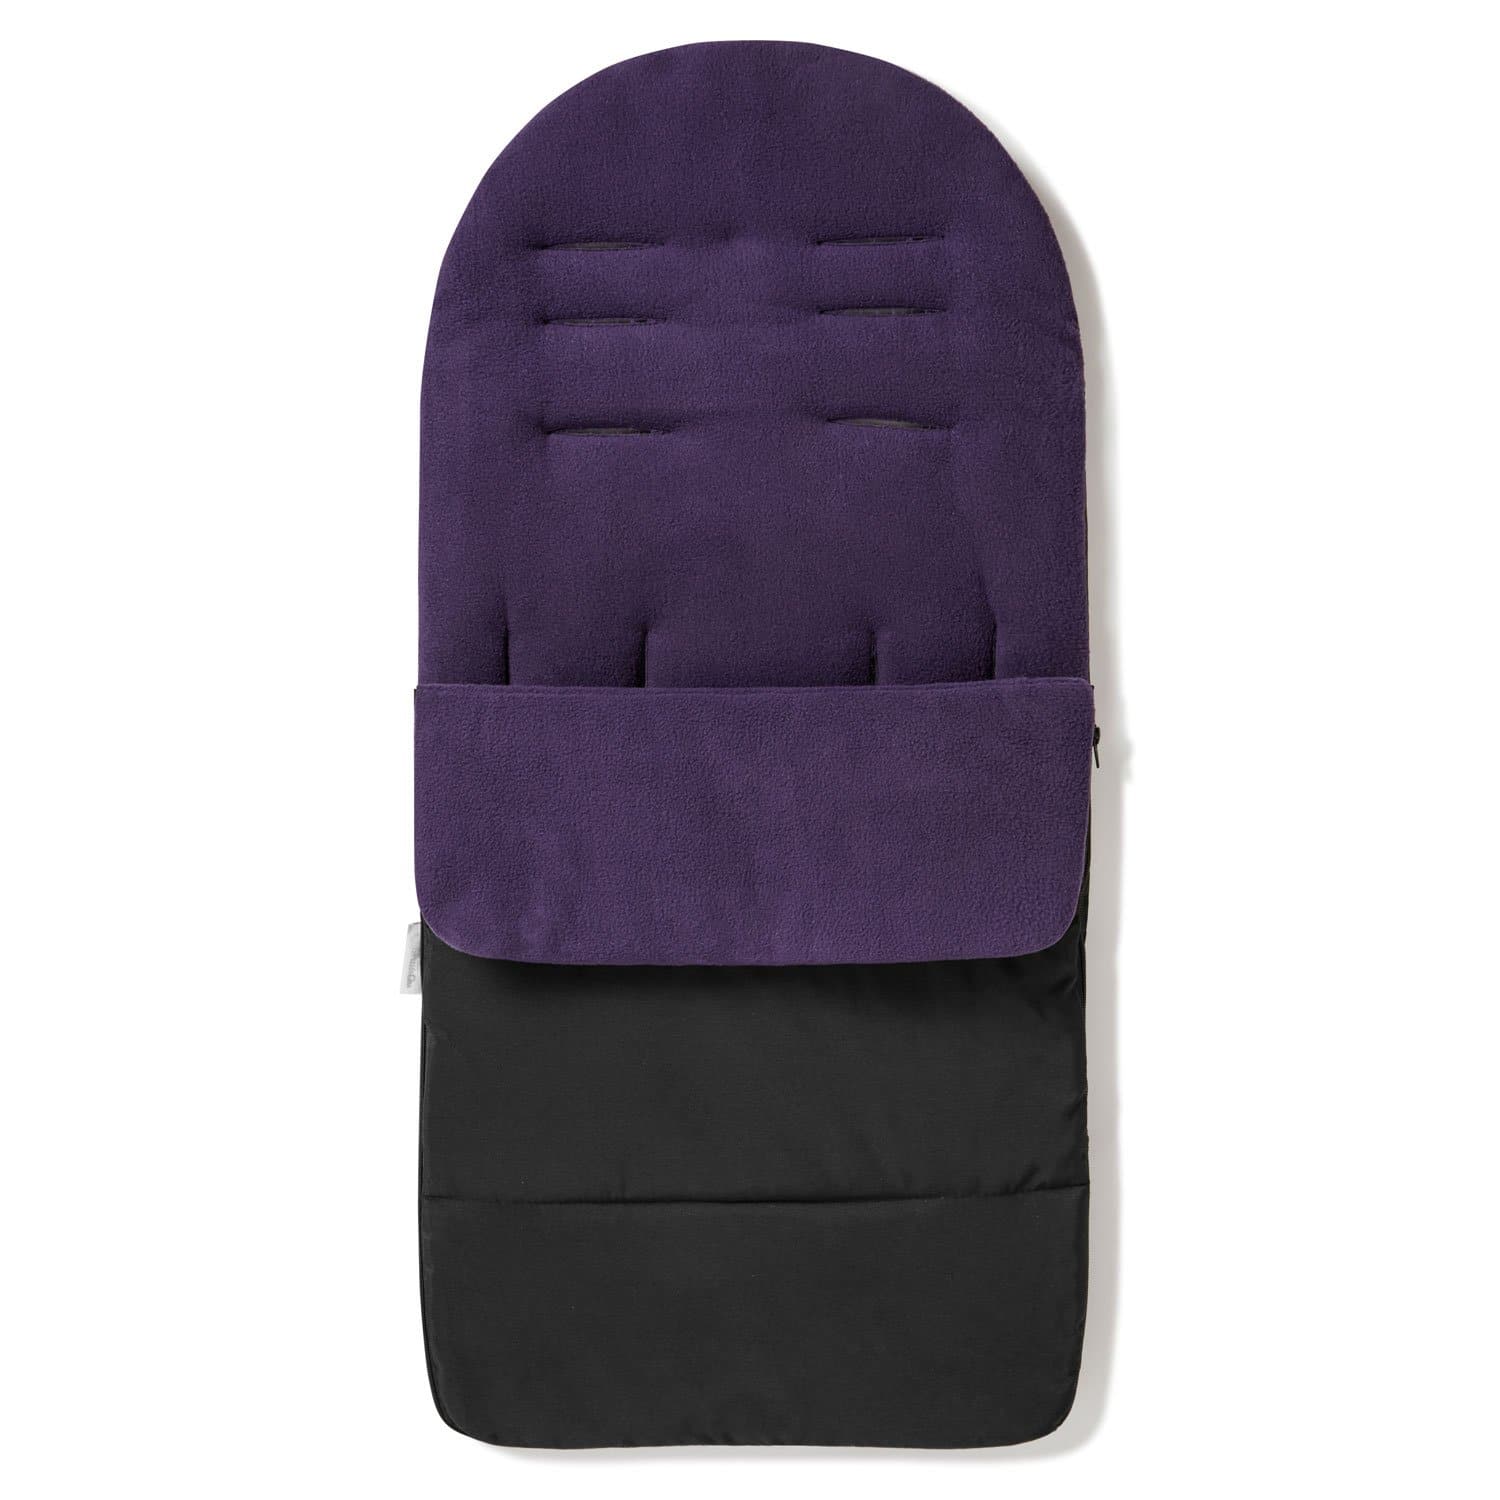 Premium Footmuff / Cosy Toes Compatible with I'coo - Plum Purple / Fits All Models | For Your Little One